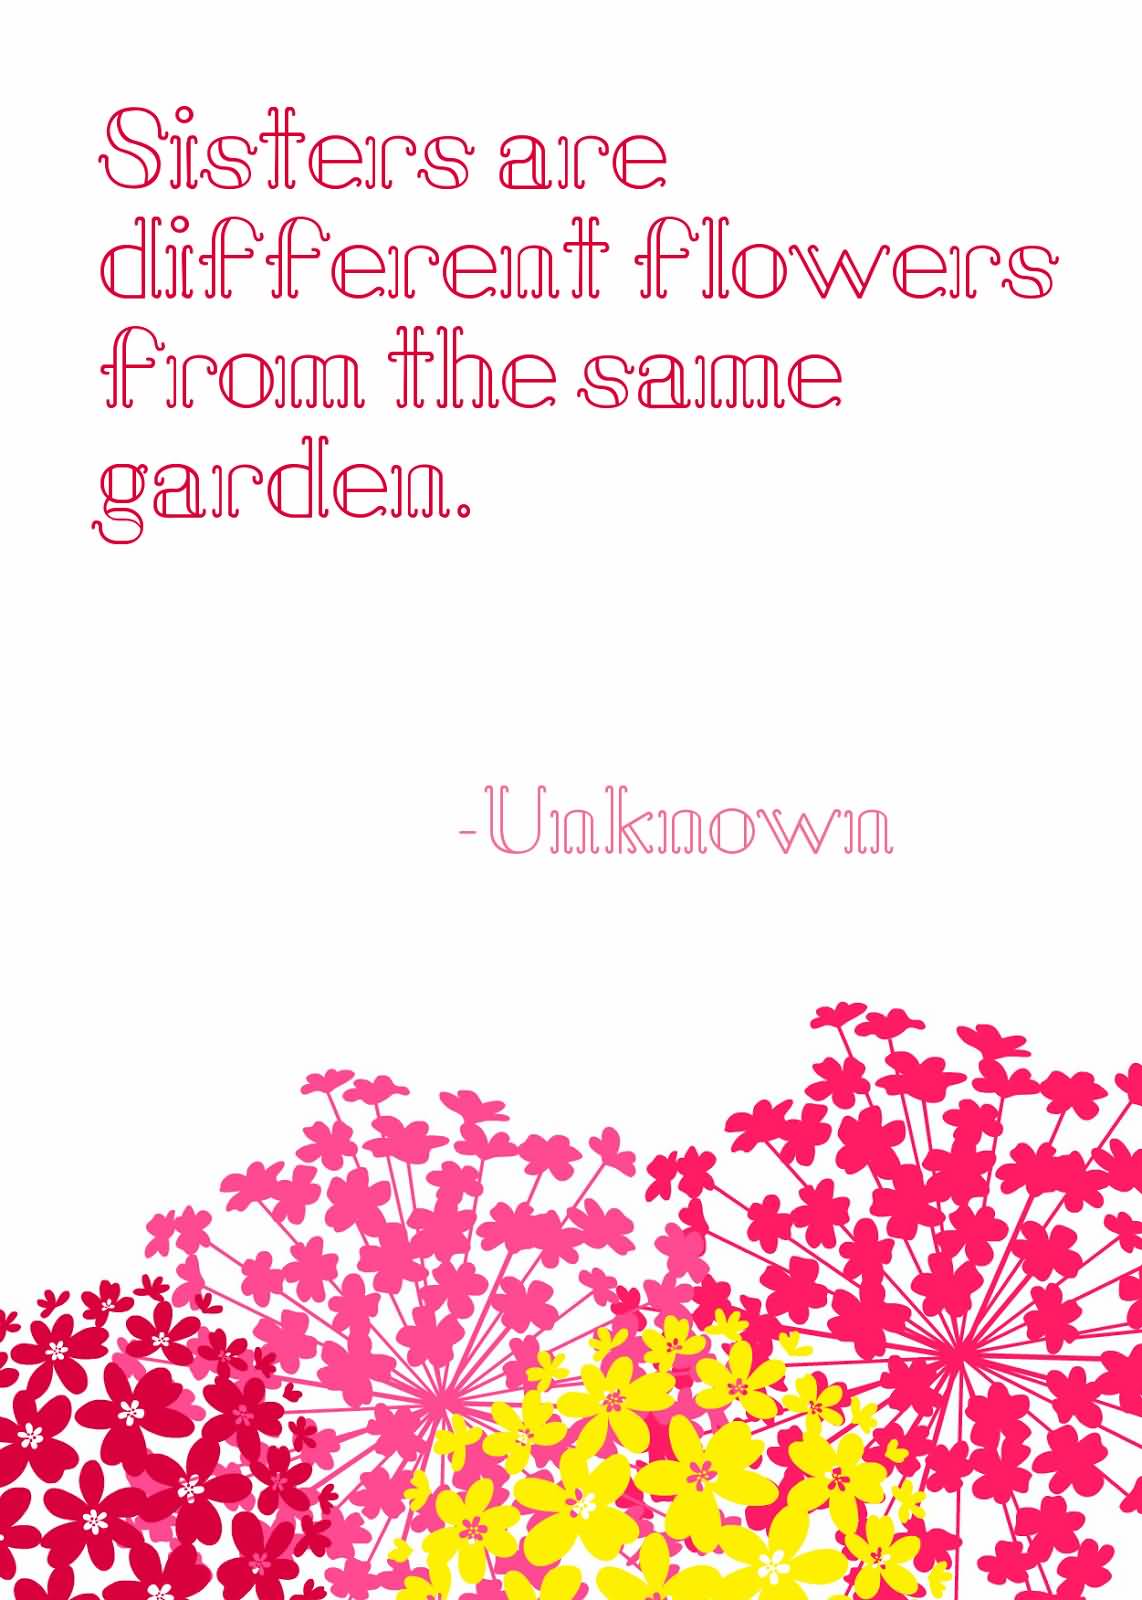 Are you a flower or a gardener meaning?